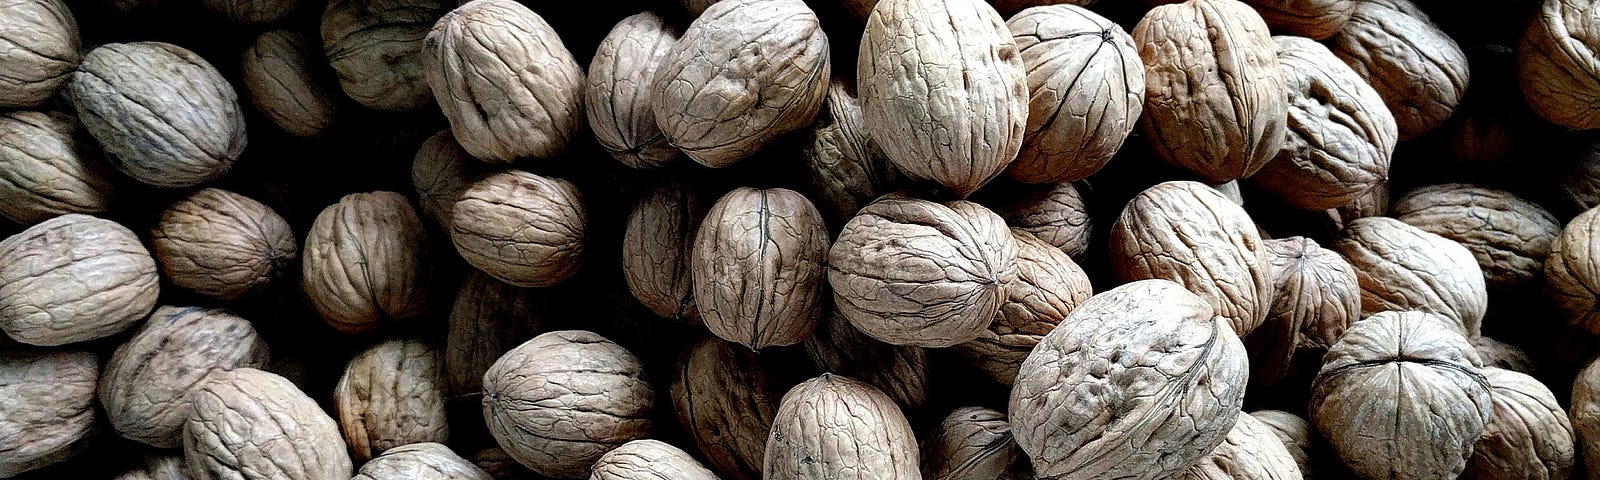 A pile of unshelled walnuts.